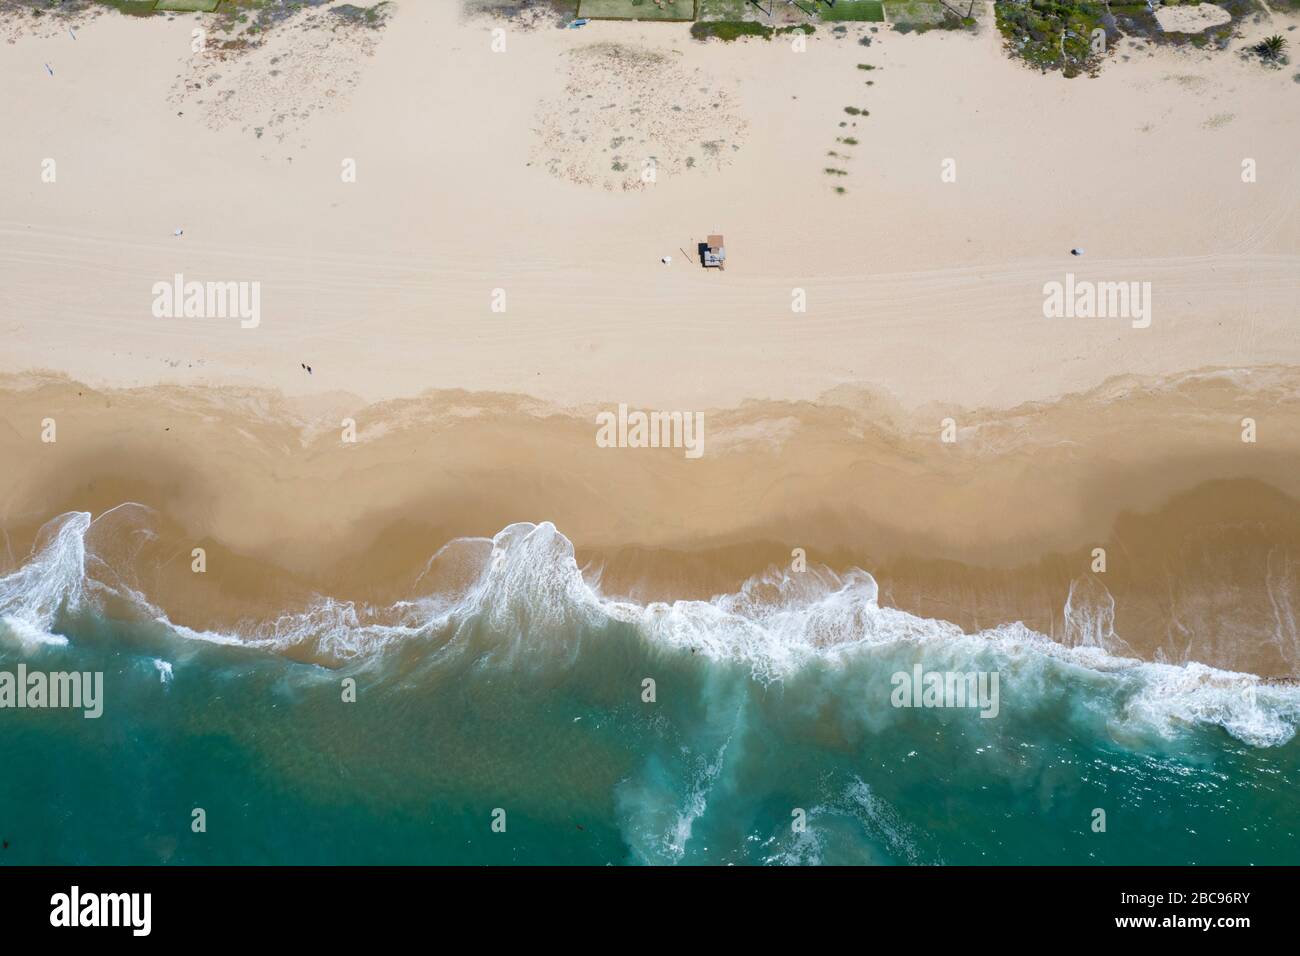 Drone view looking down on California Beach Stock Photo